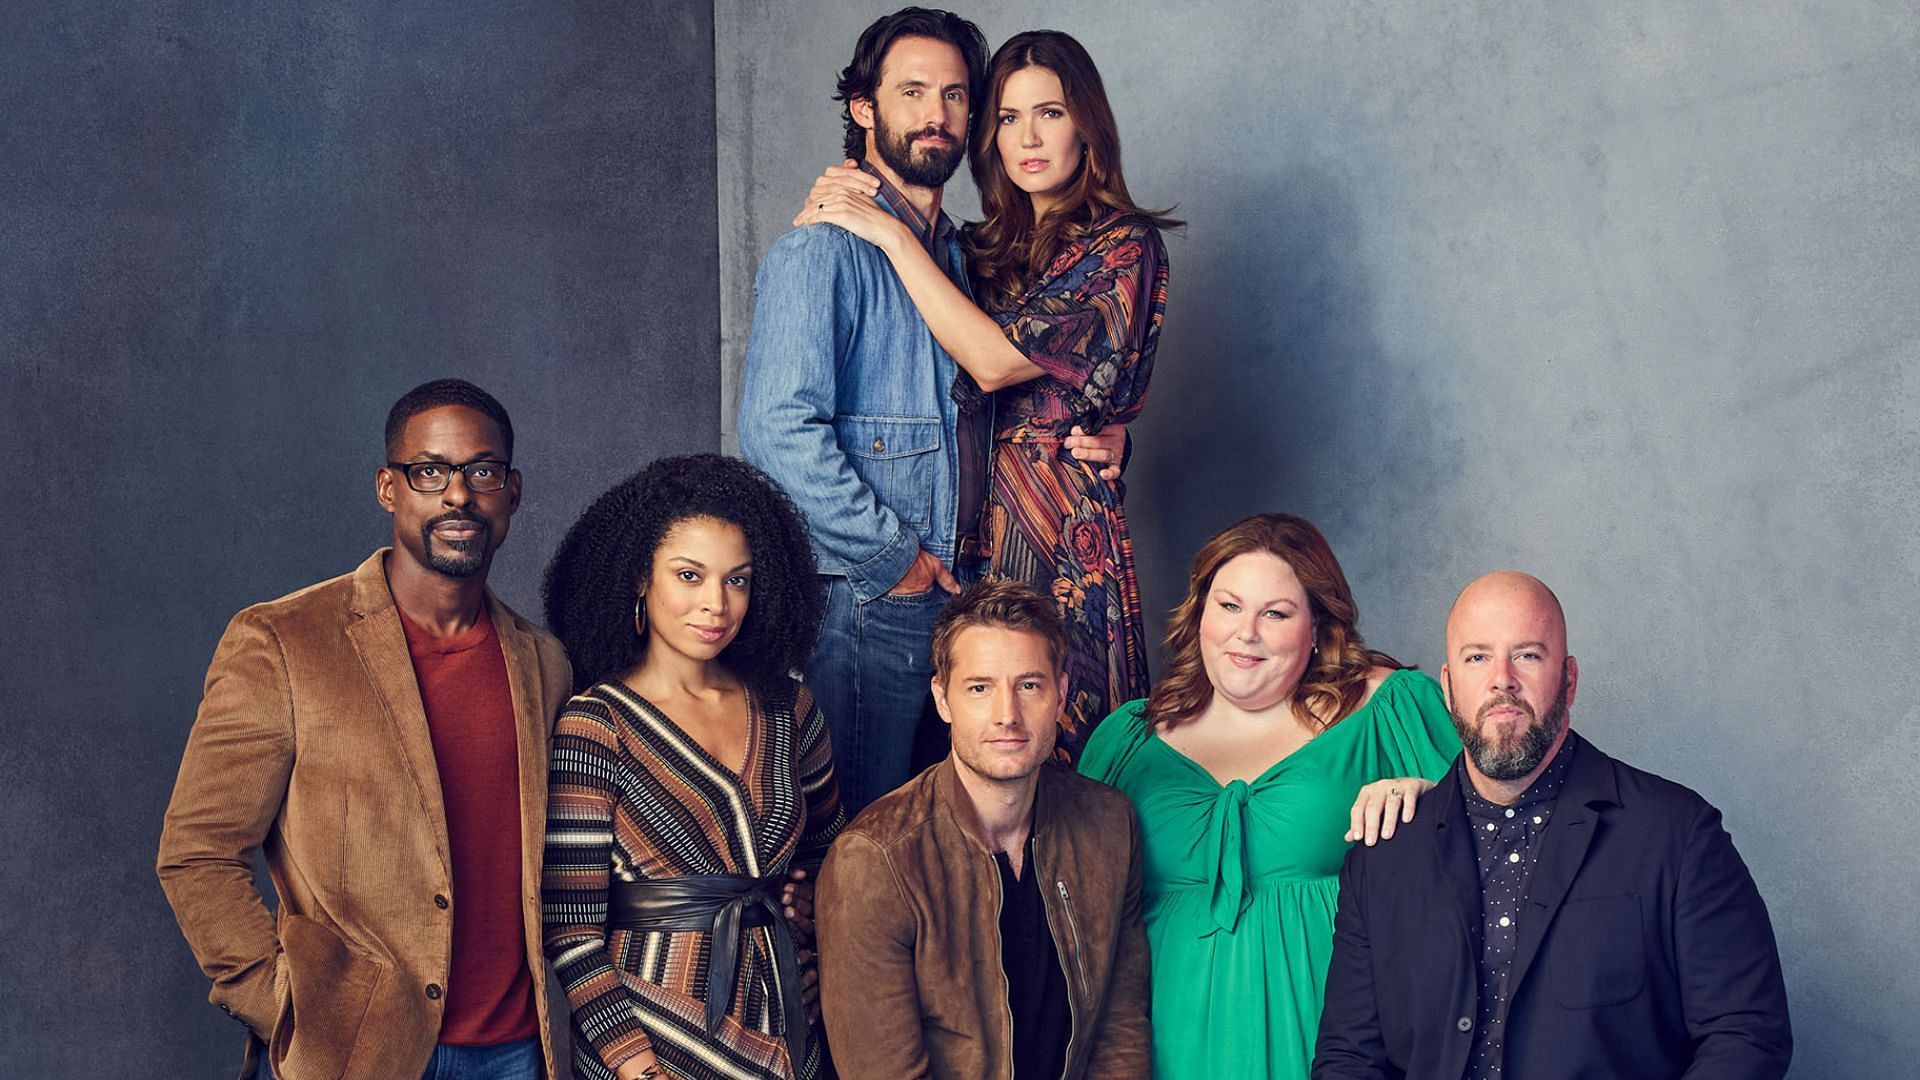 What time will This Is Us Season 6 episode 18 (series finale) air on